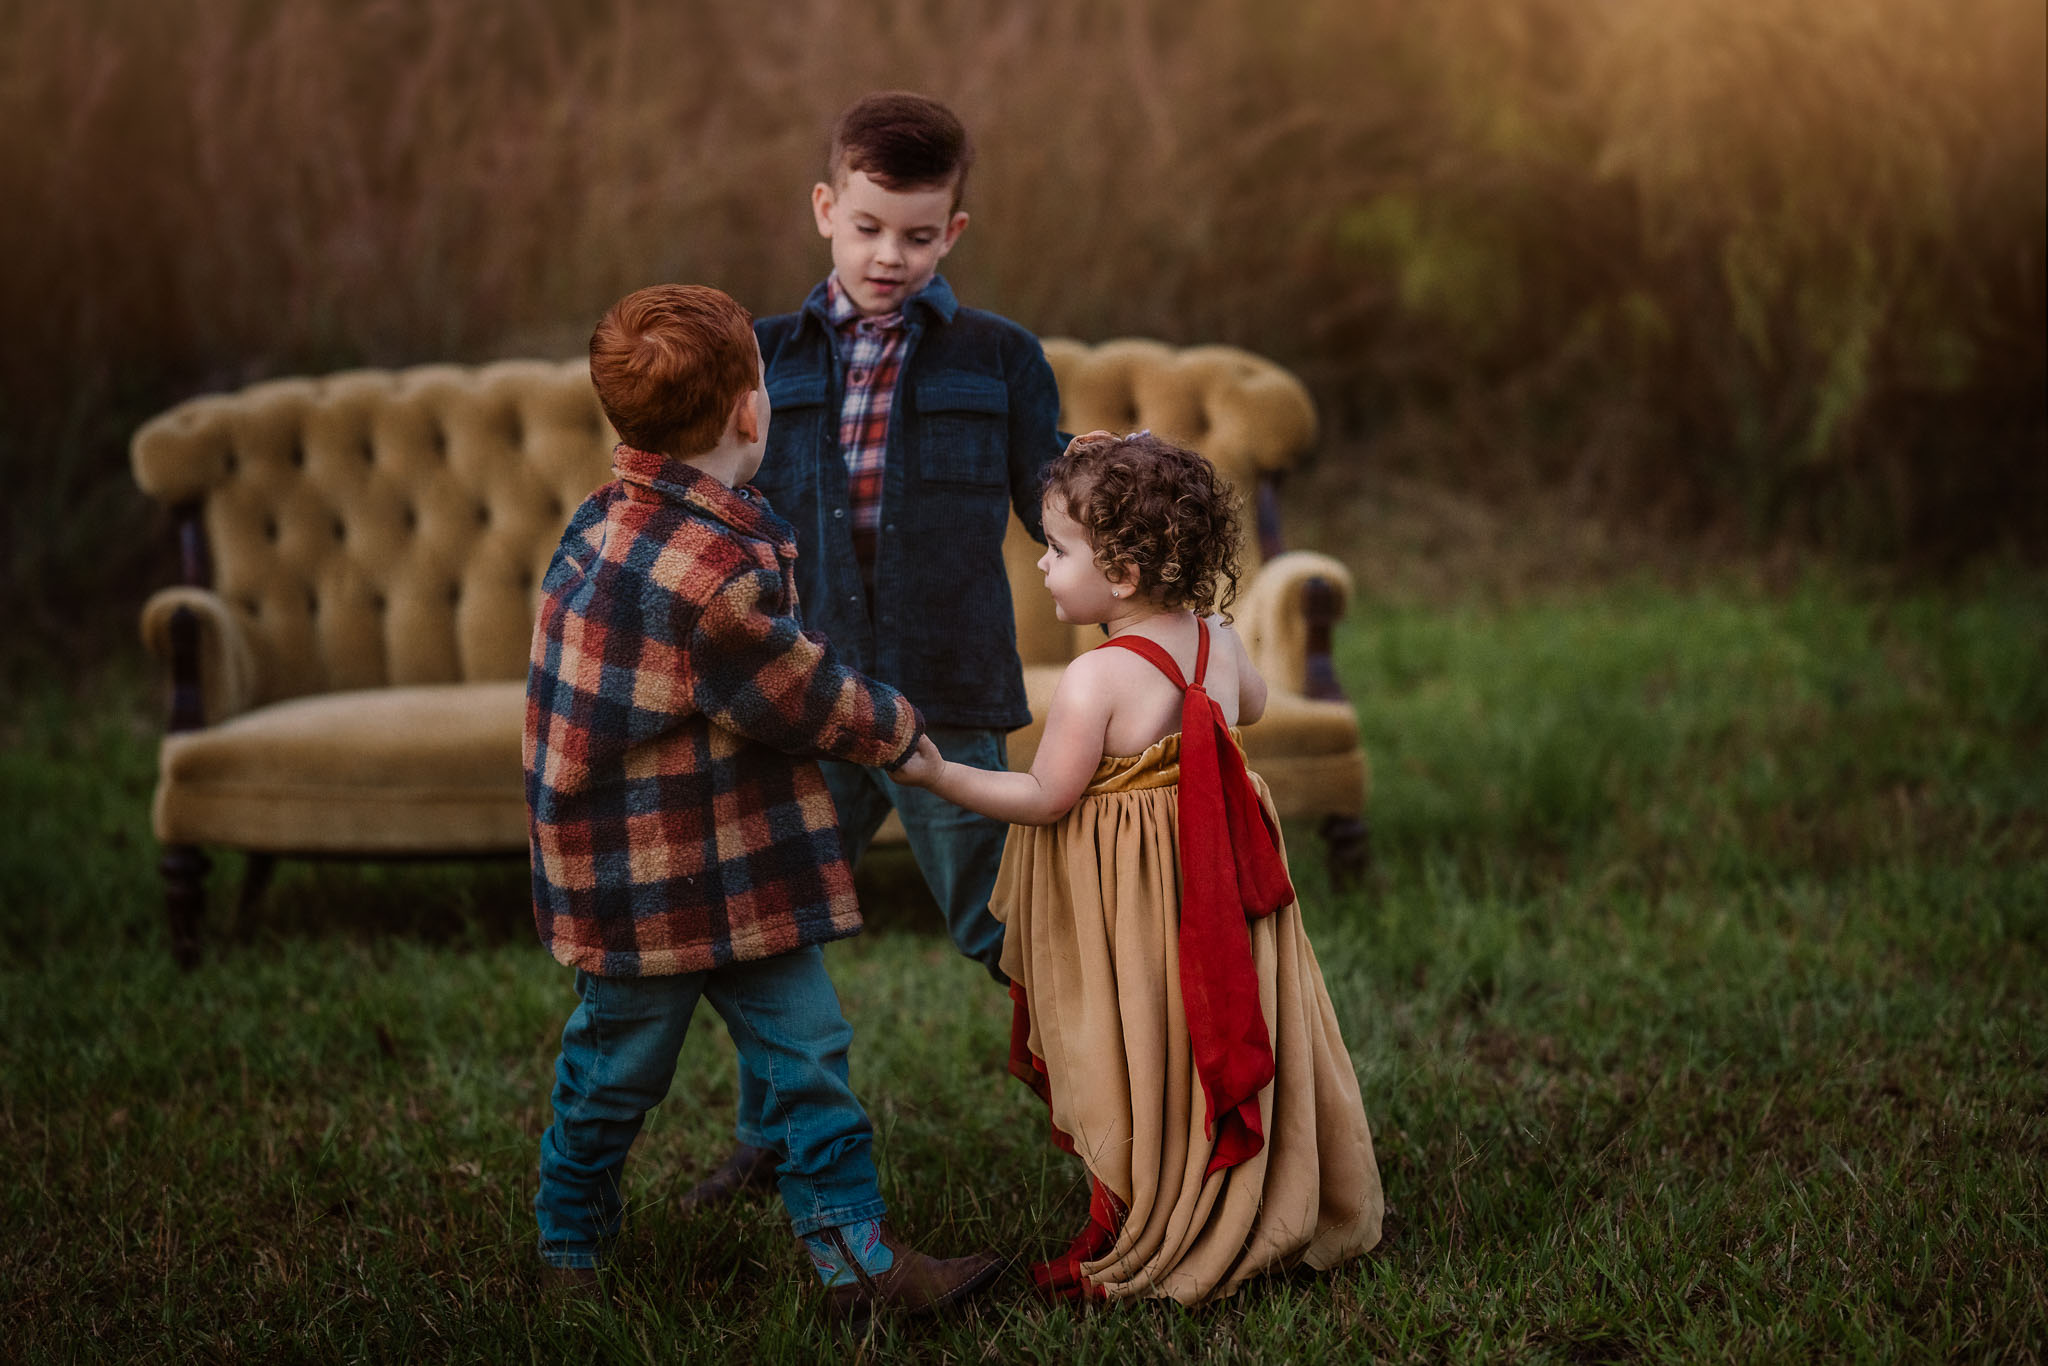 Three siblings hold hands and play together in a grassy field in front of a couch raleigh toy stores